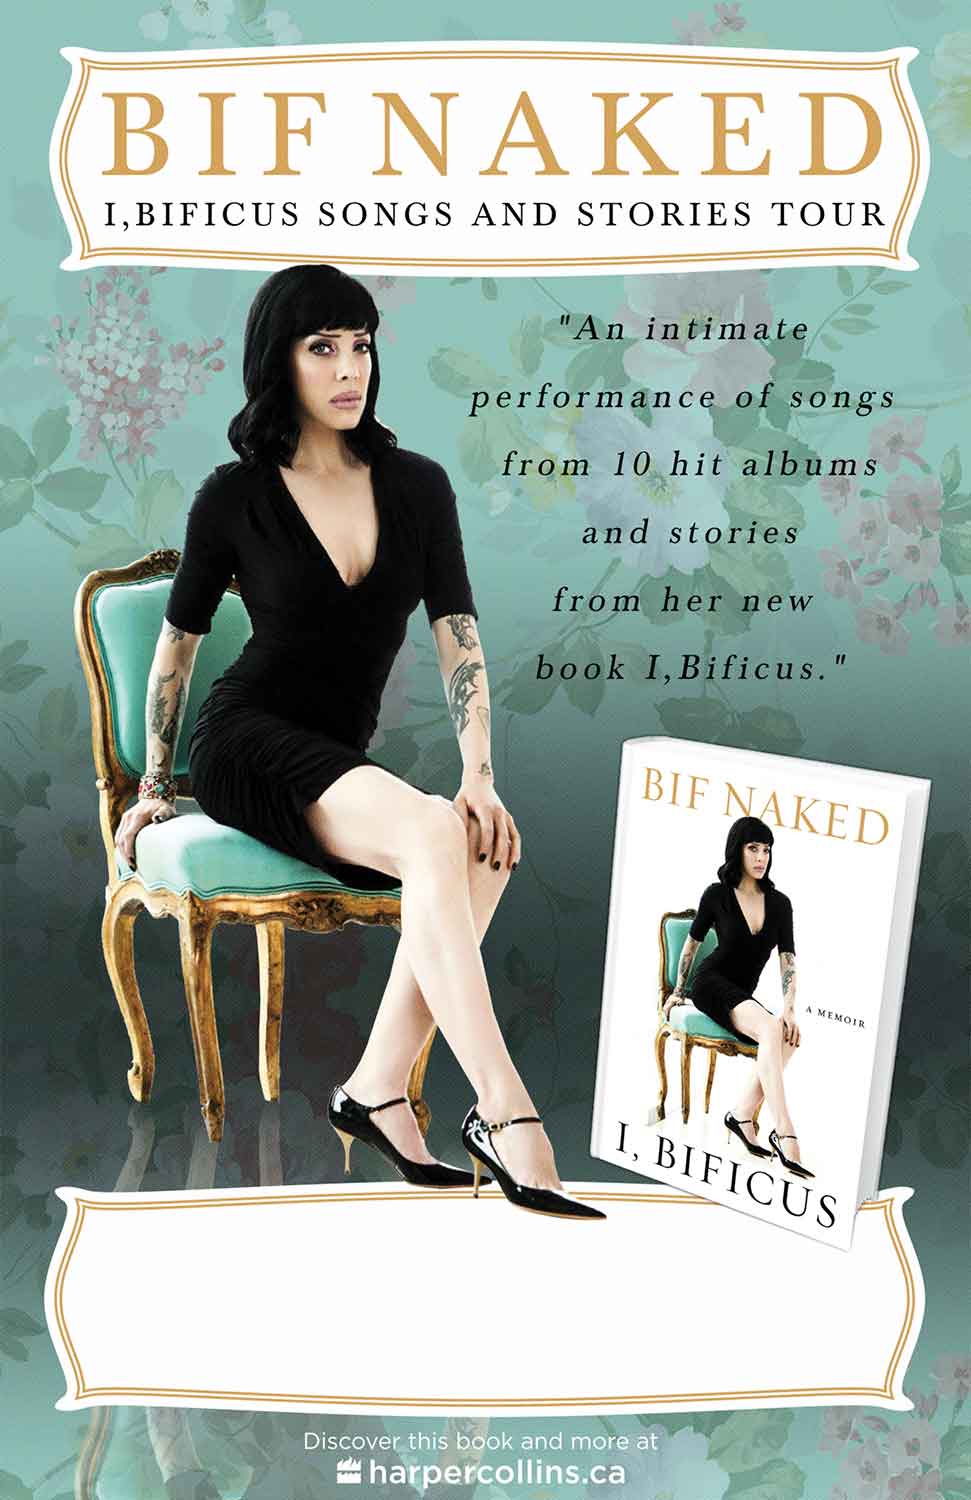 An evening with Bif Naked